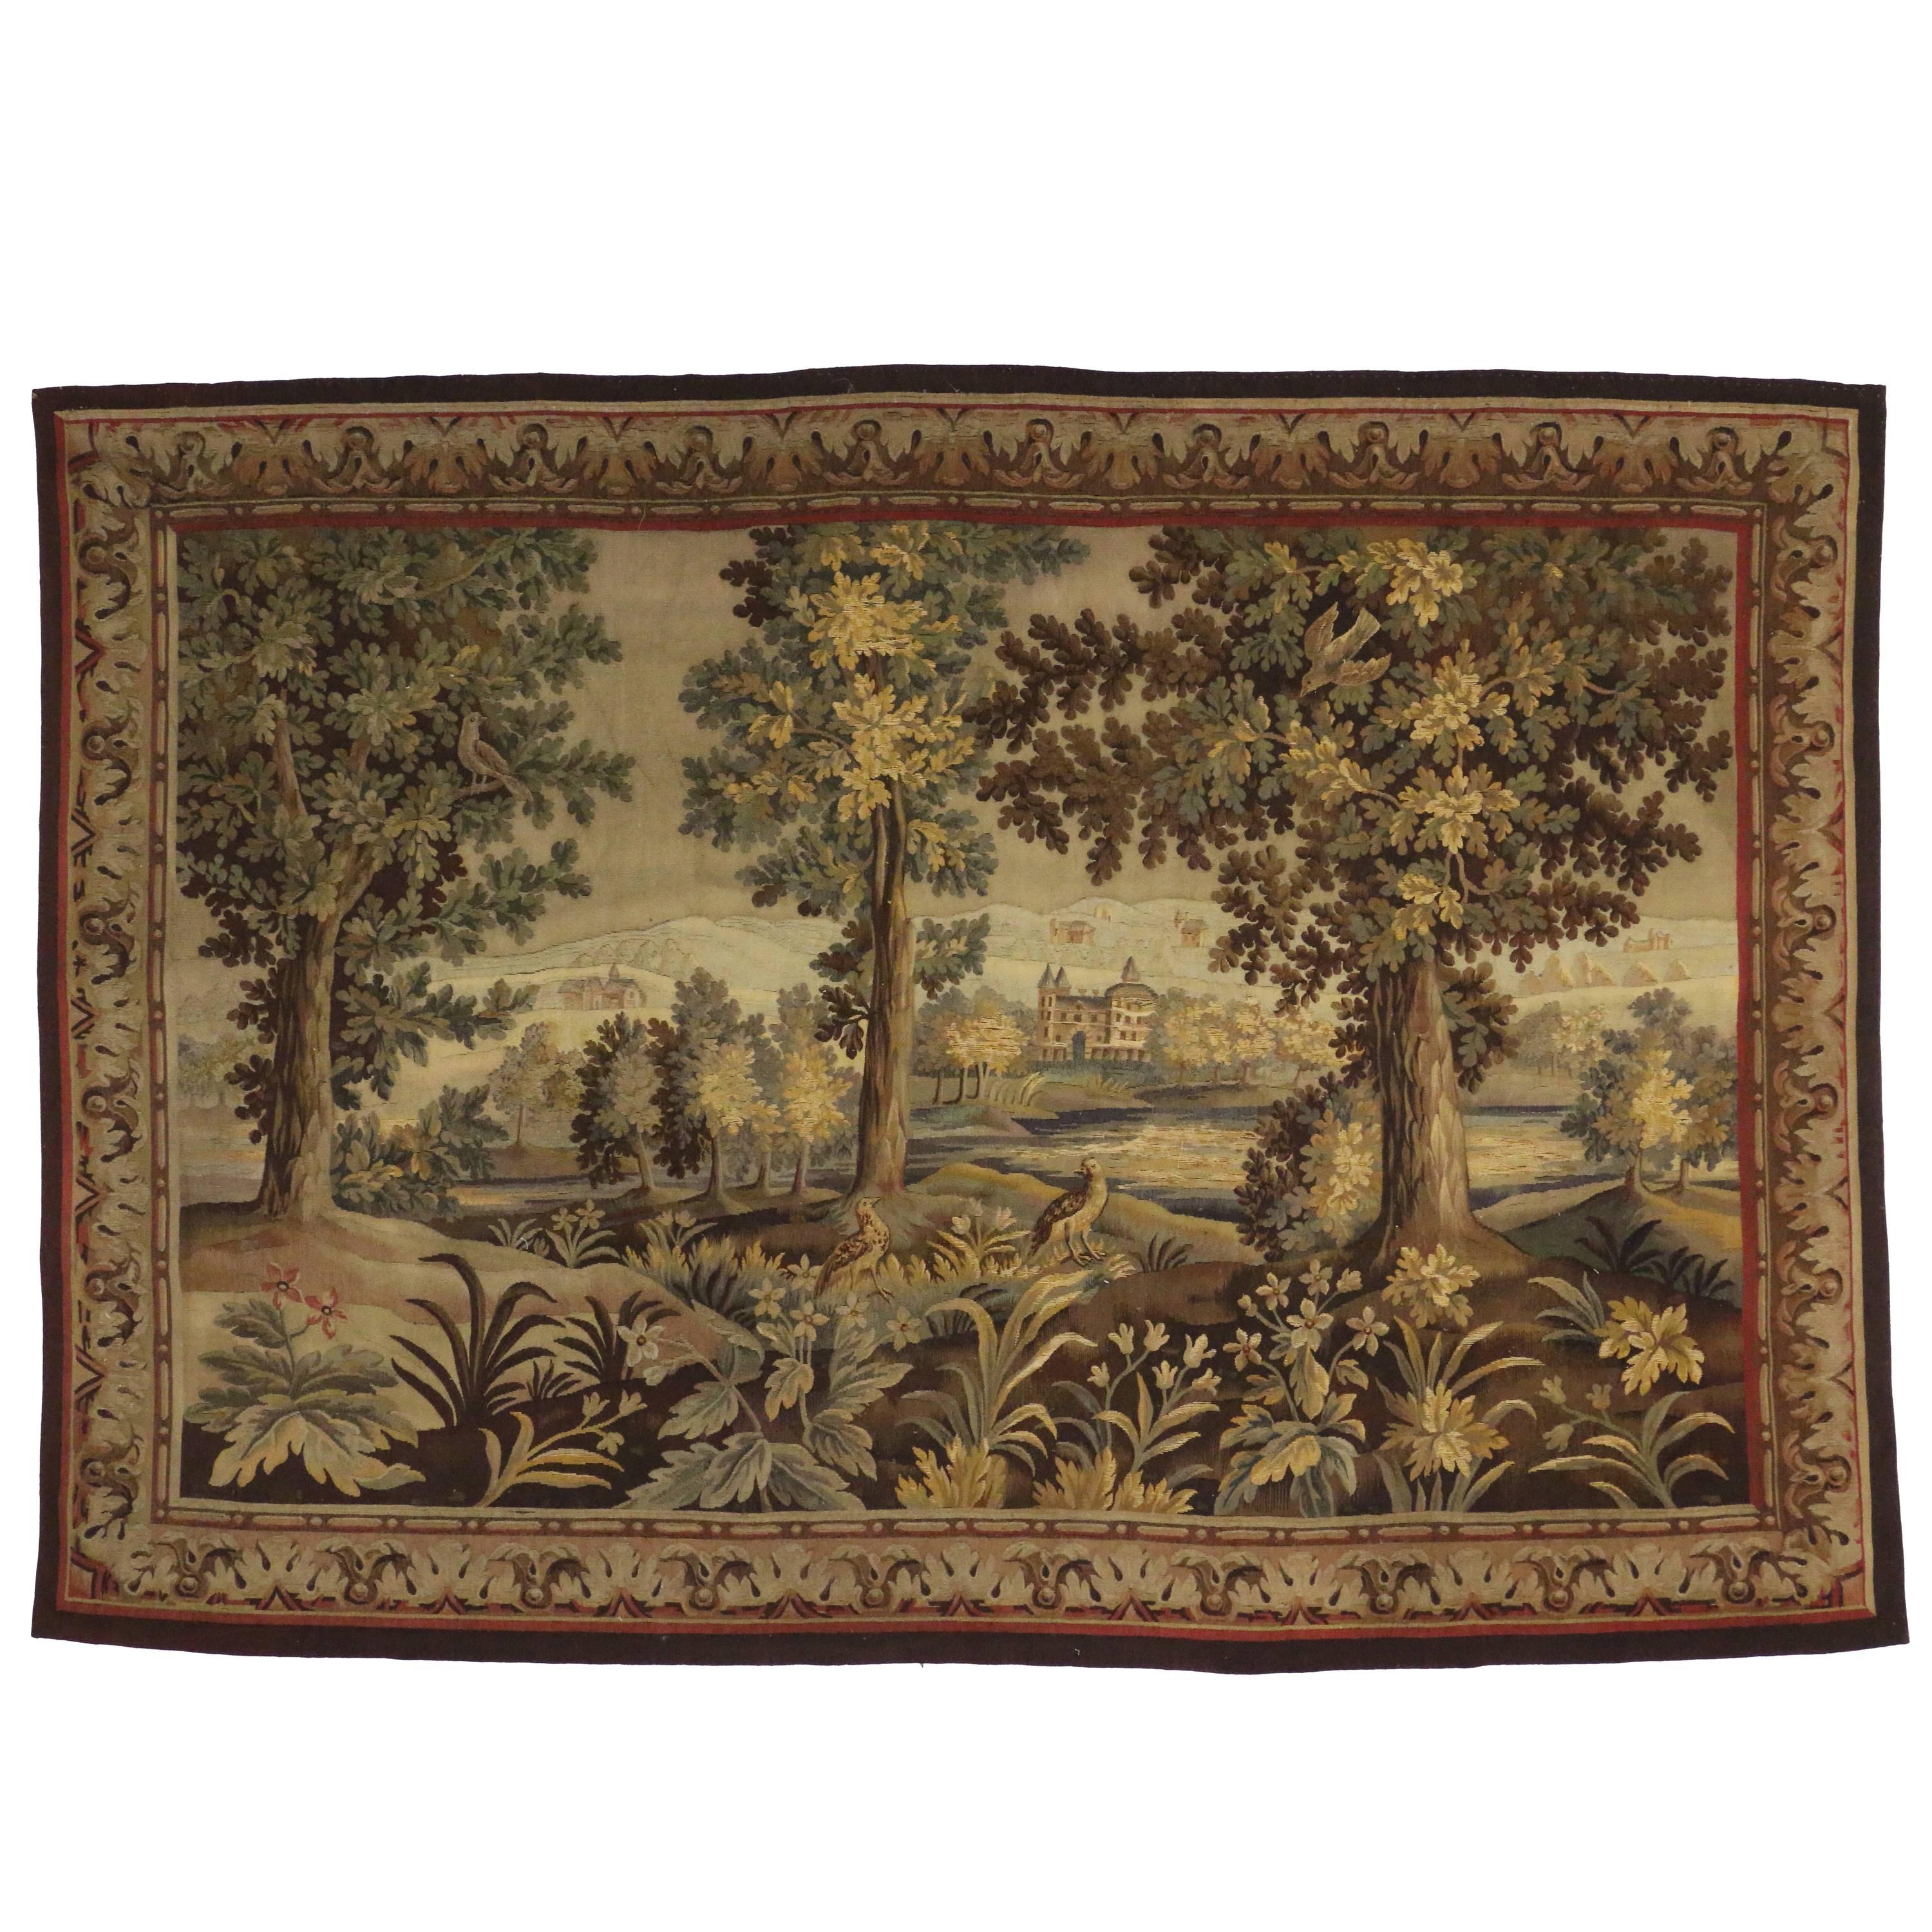 Late 19th Century Antique French Aubusson Verdure Garden Tapestry Wall Hanging